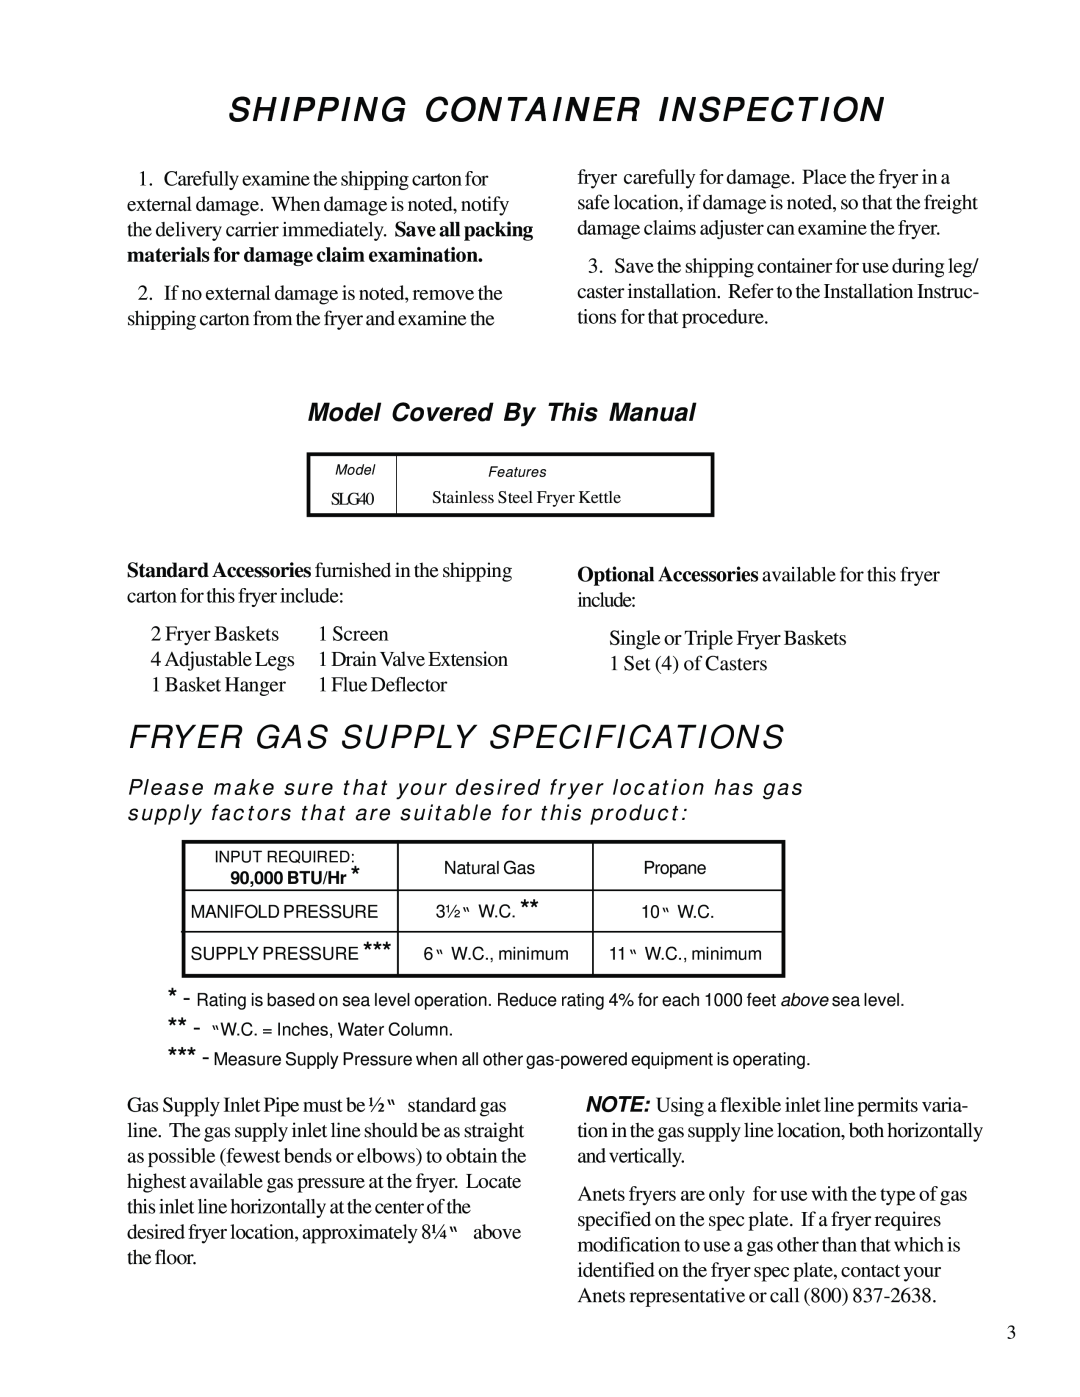 Anetsberger Brothers SLG40 Shipping Container Inspection, Fryer Gas Supply Specifications, Model Covered By This Manual 